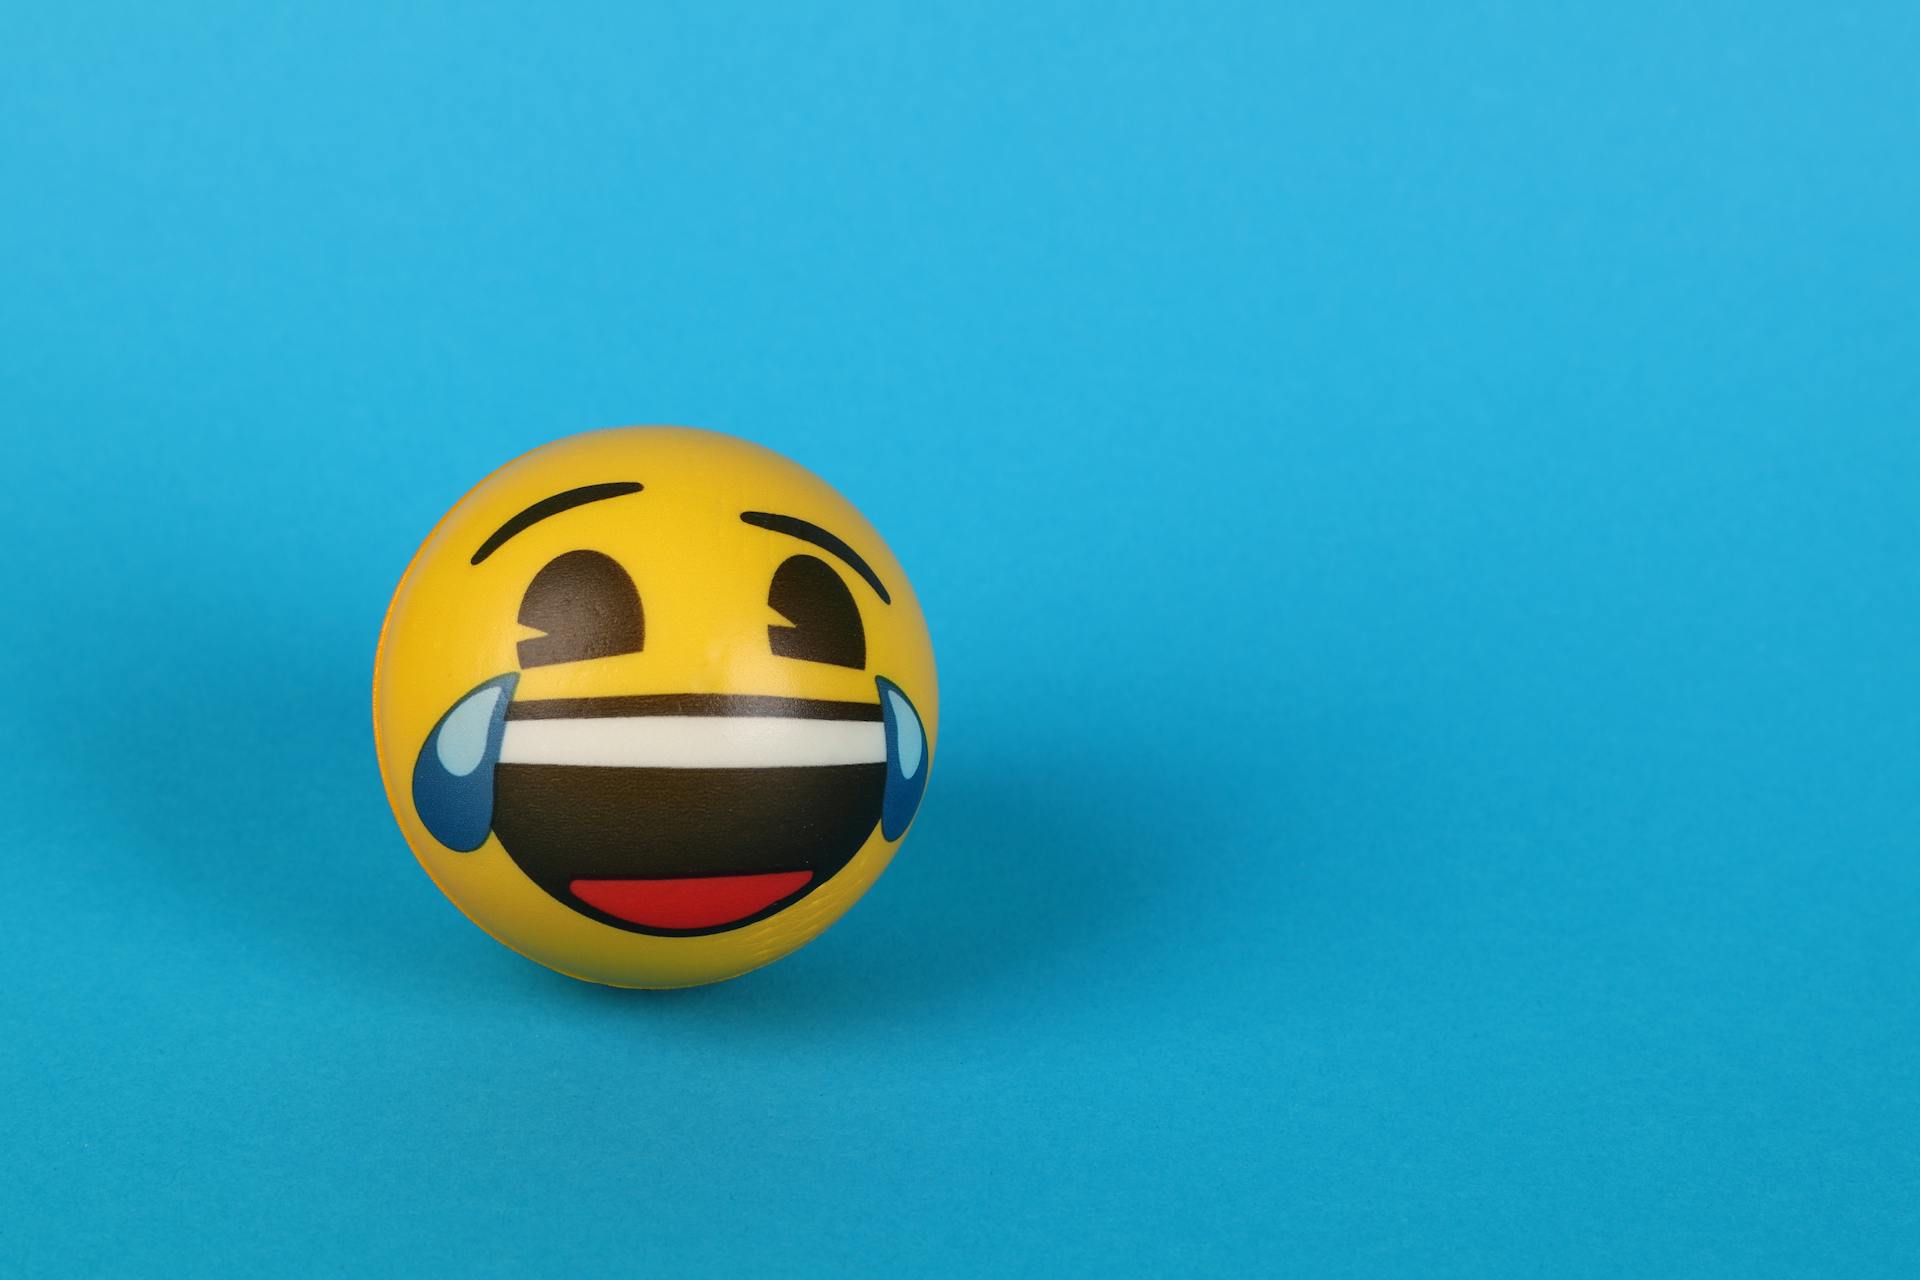 A laughing emoji with tears over a blue surface | Source: Pexels